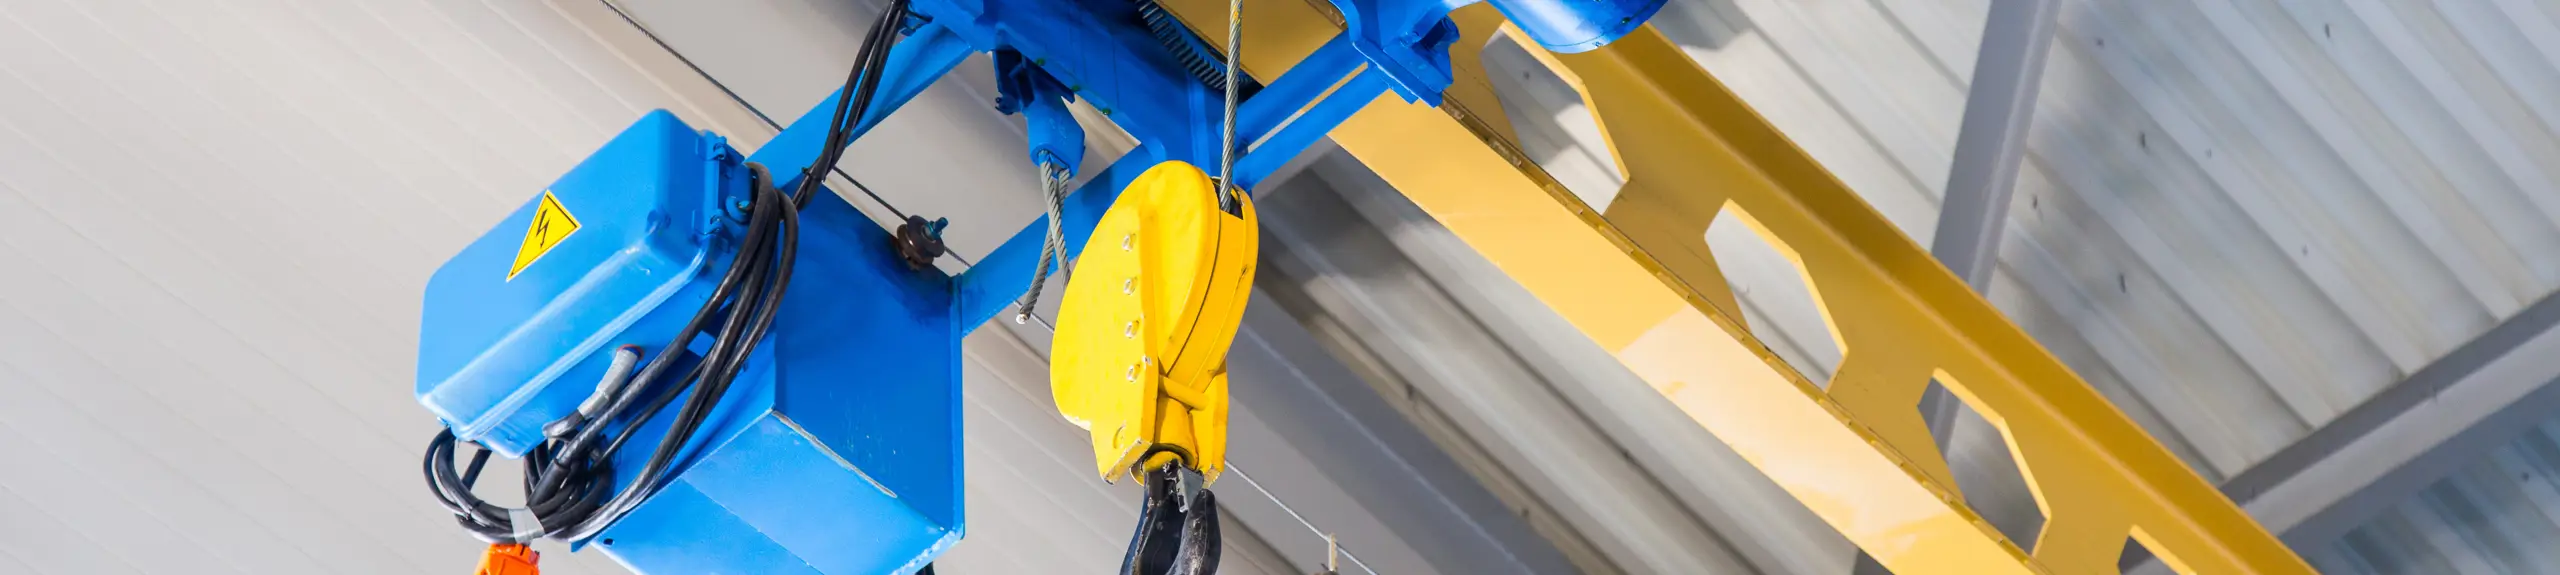 A yellow and blue overhead warehouse crane.